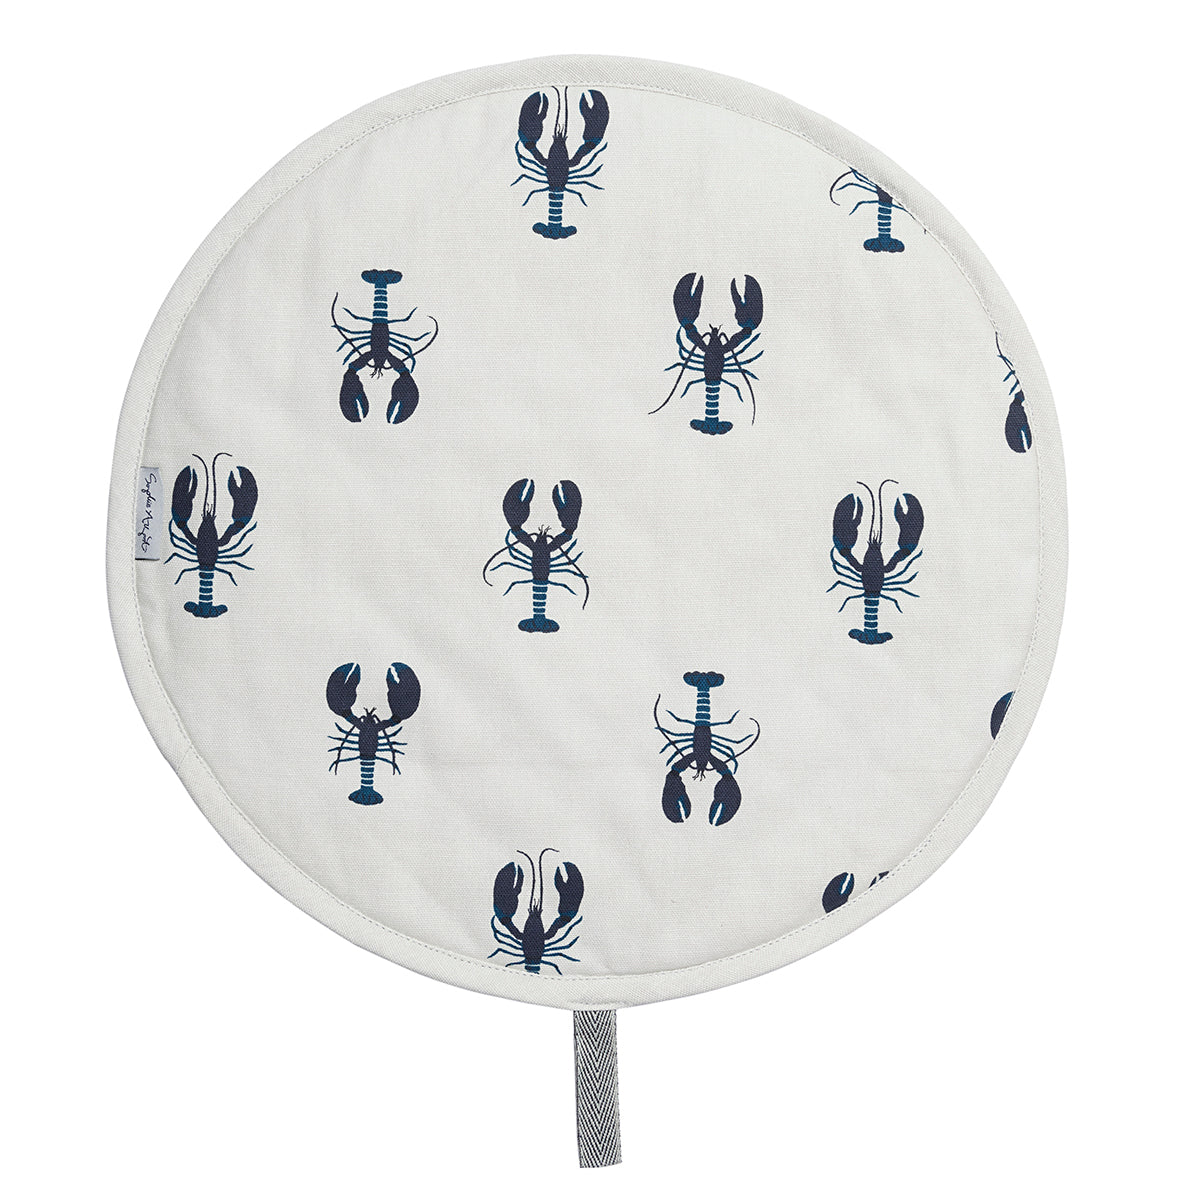 Dark blue lobster illustrations on a hob cover with loop